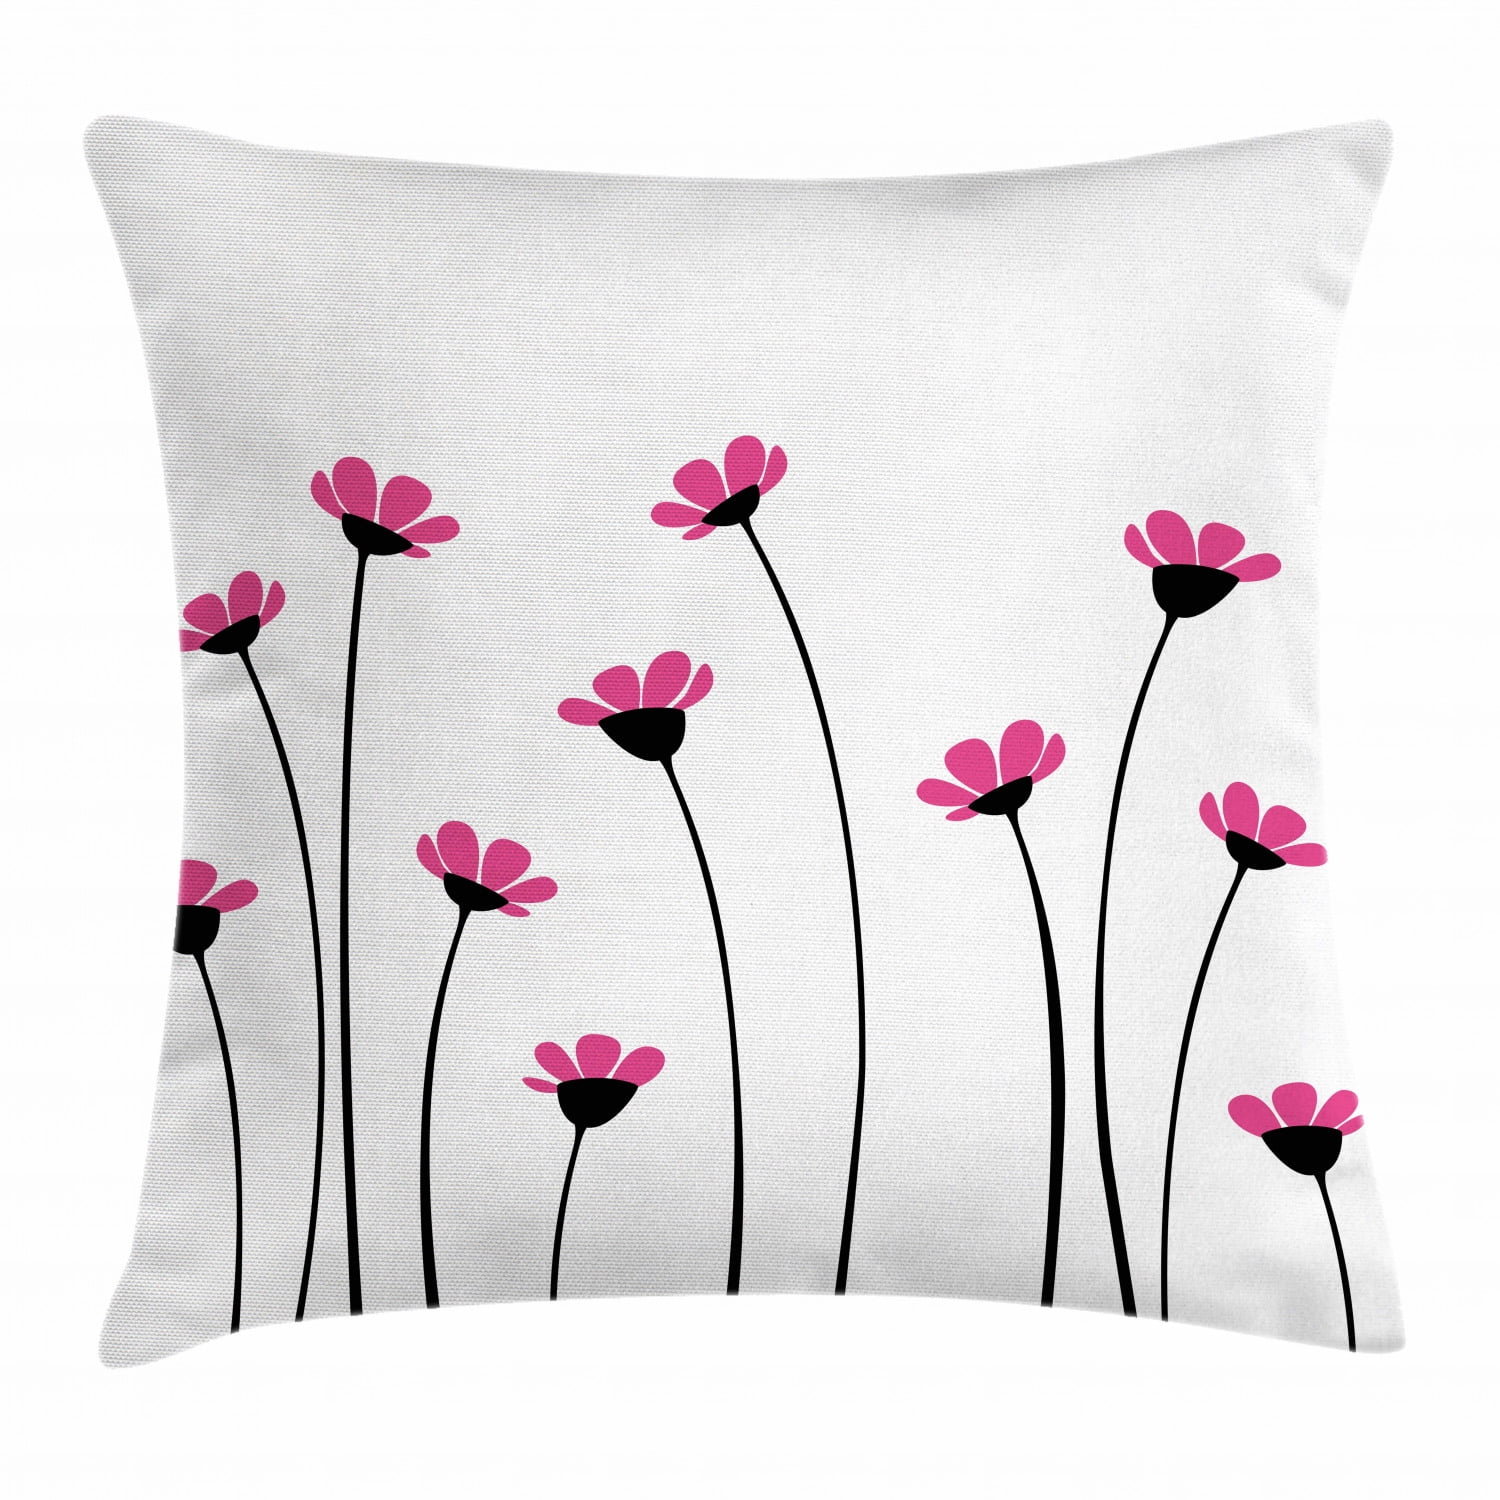 Pink Daisies on Black Pillow